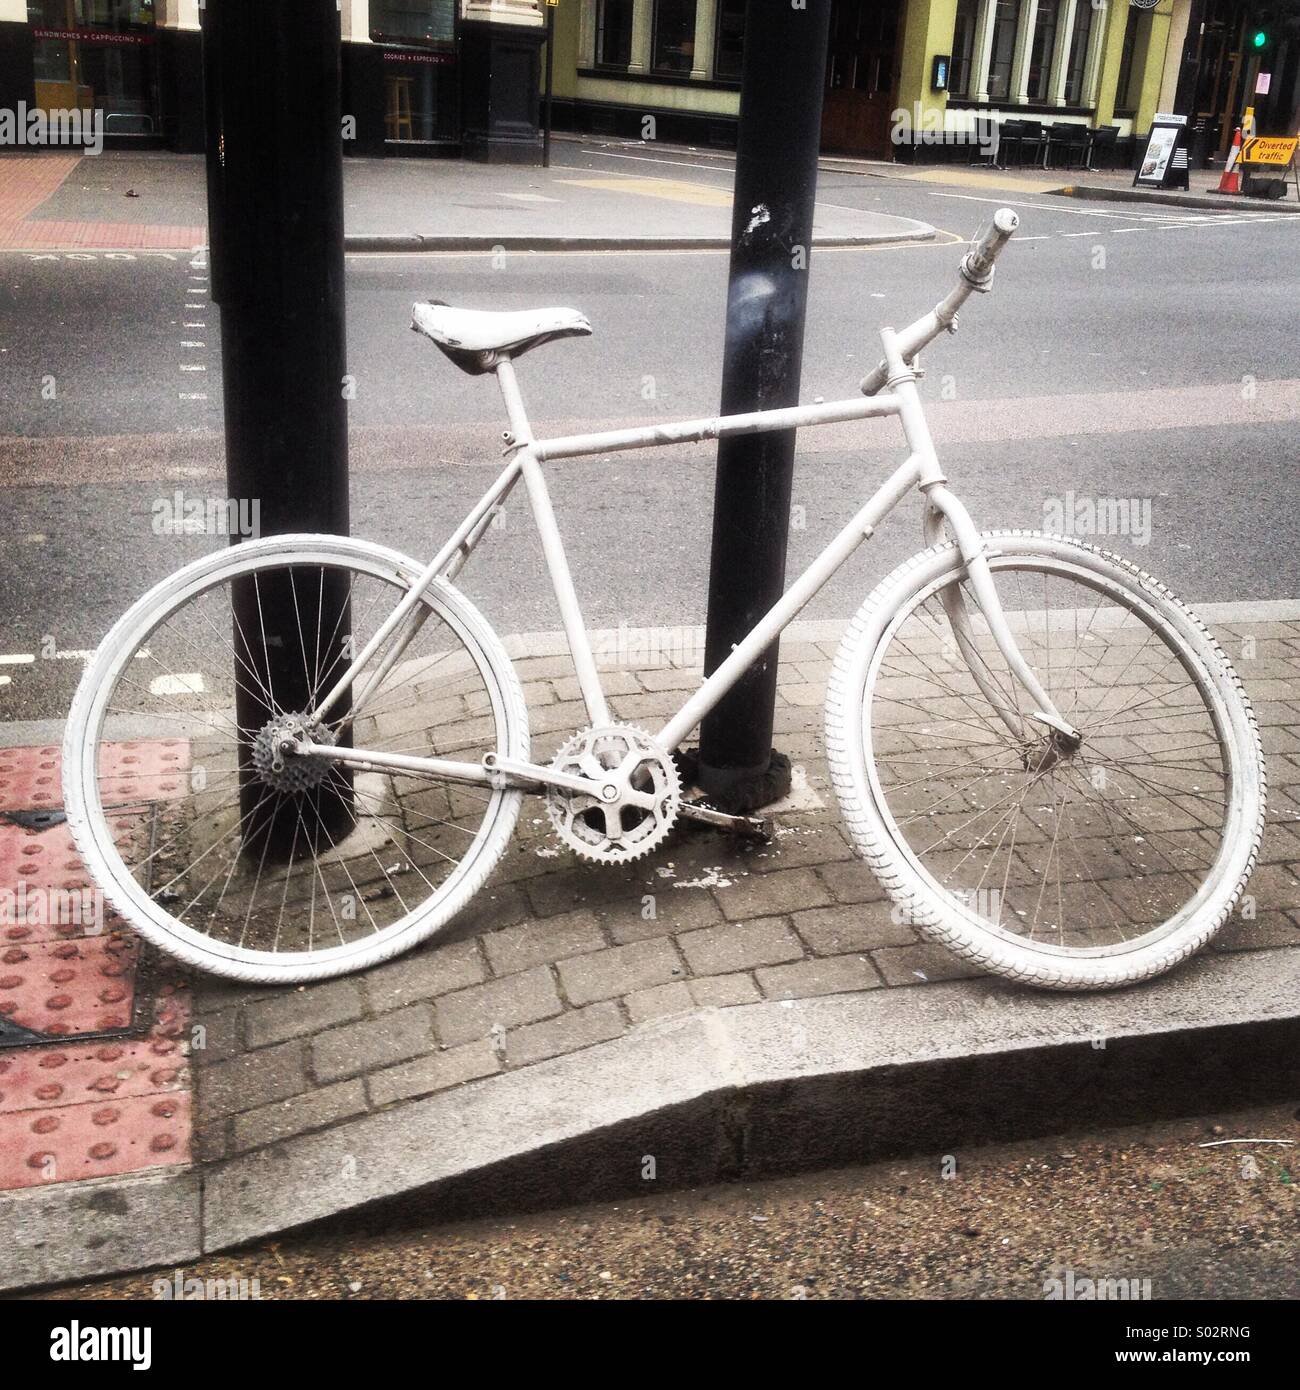 Ghost bicycle - to mark the location where cyclists have been killed in road accidents in central London, a white bicycle is chained up to remind those of the cyclist who passed away Stock Photo